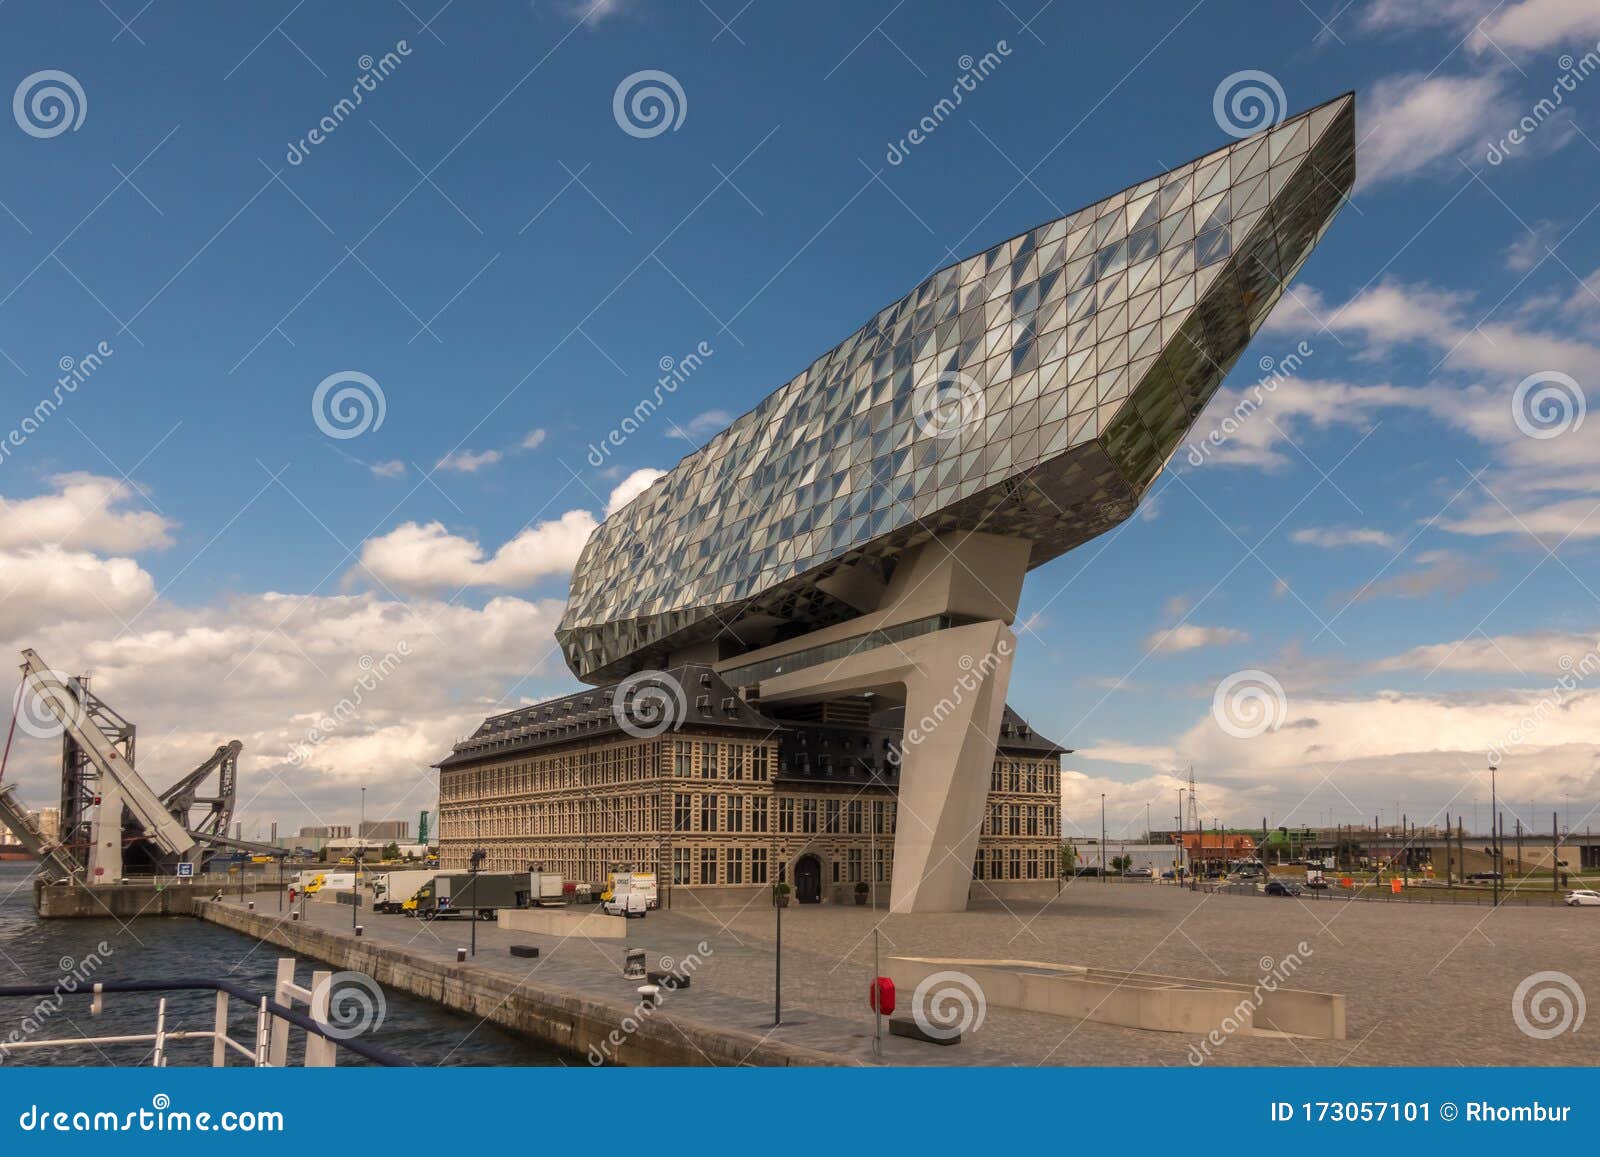 Antwerp Port Administration Headquarters, Designed By Famous Iranian ...